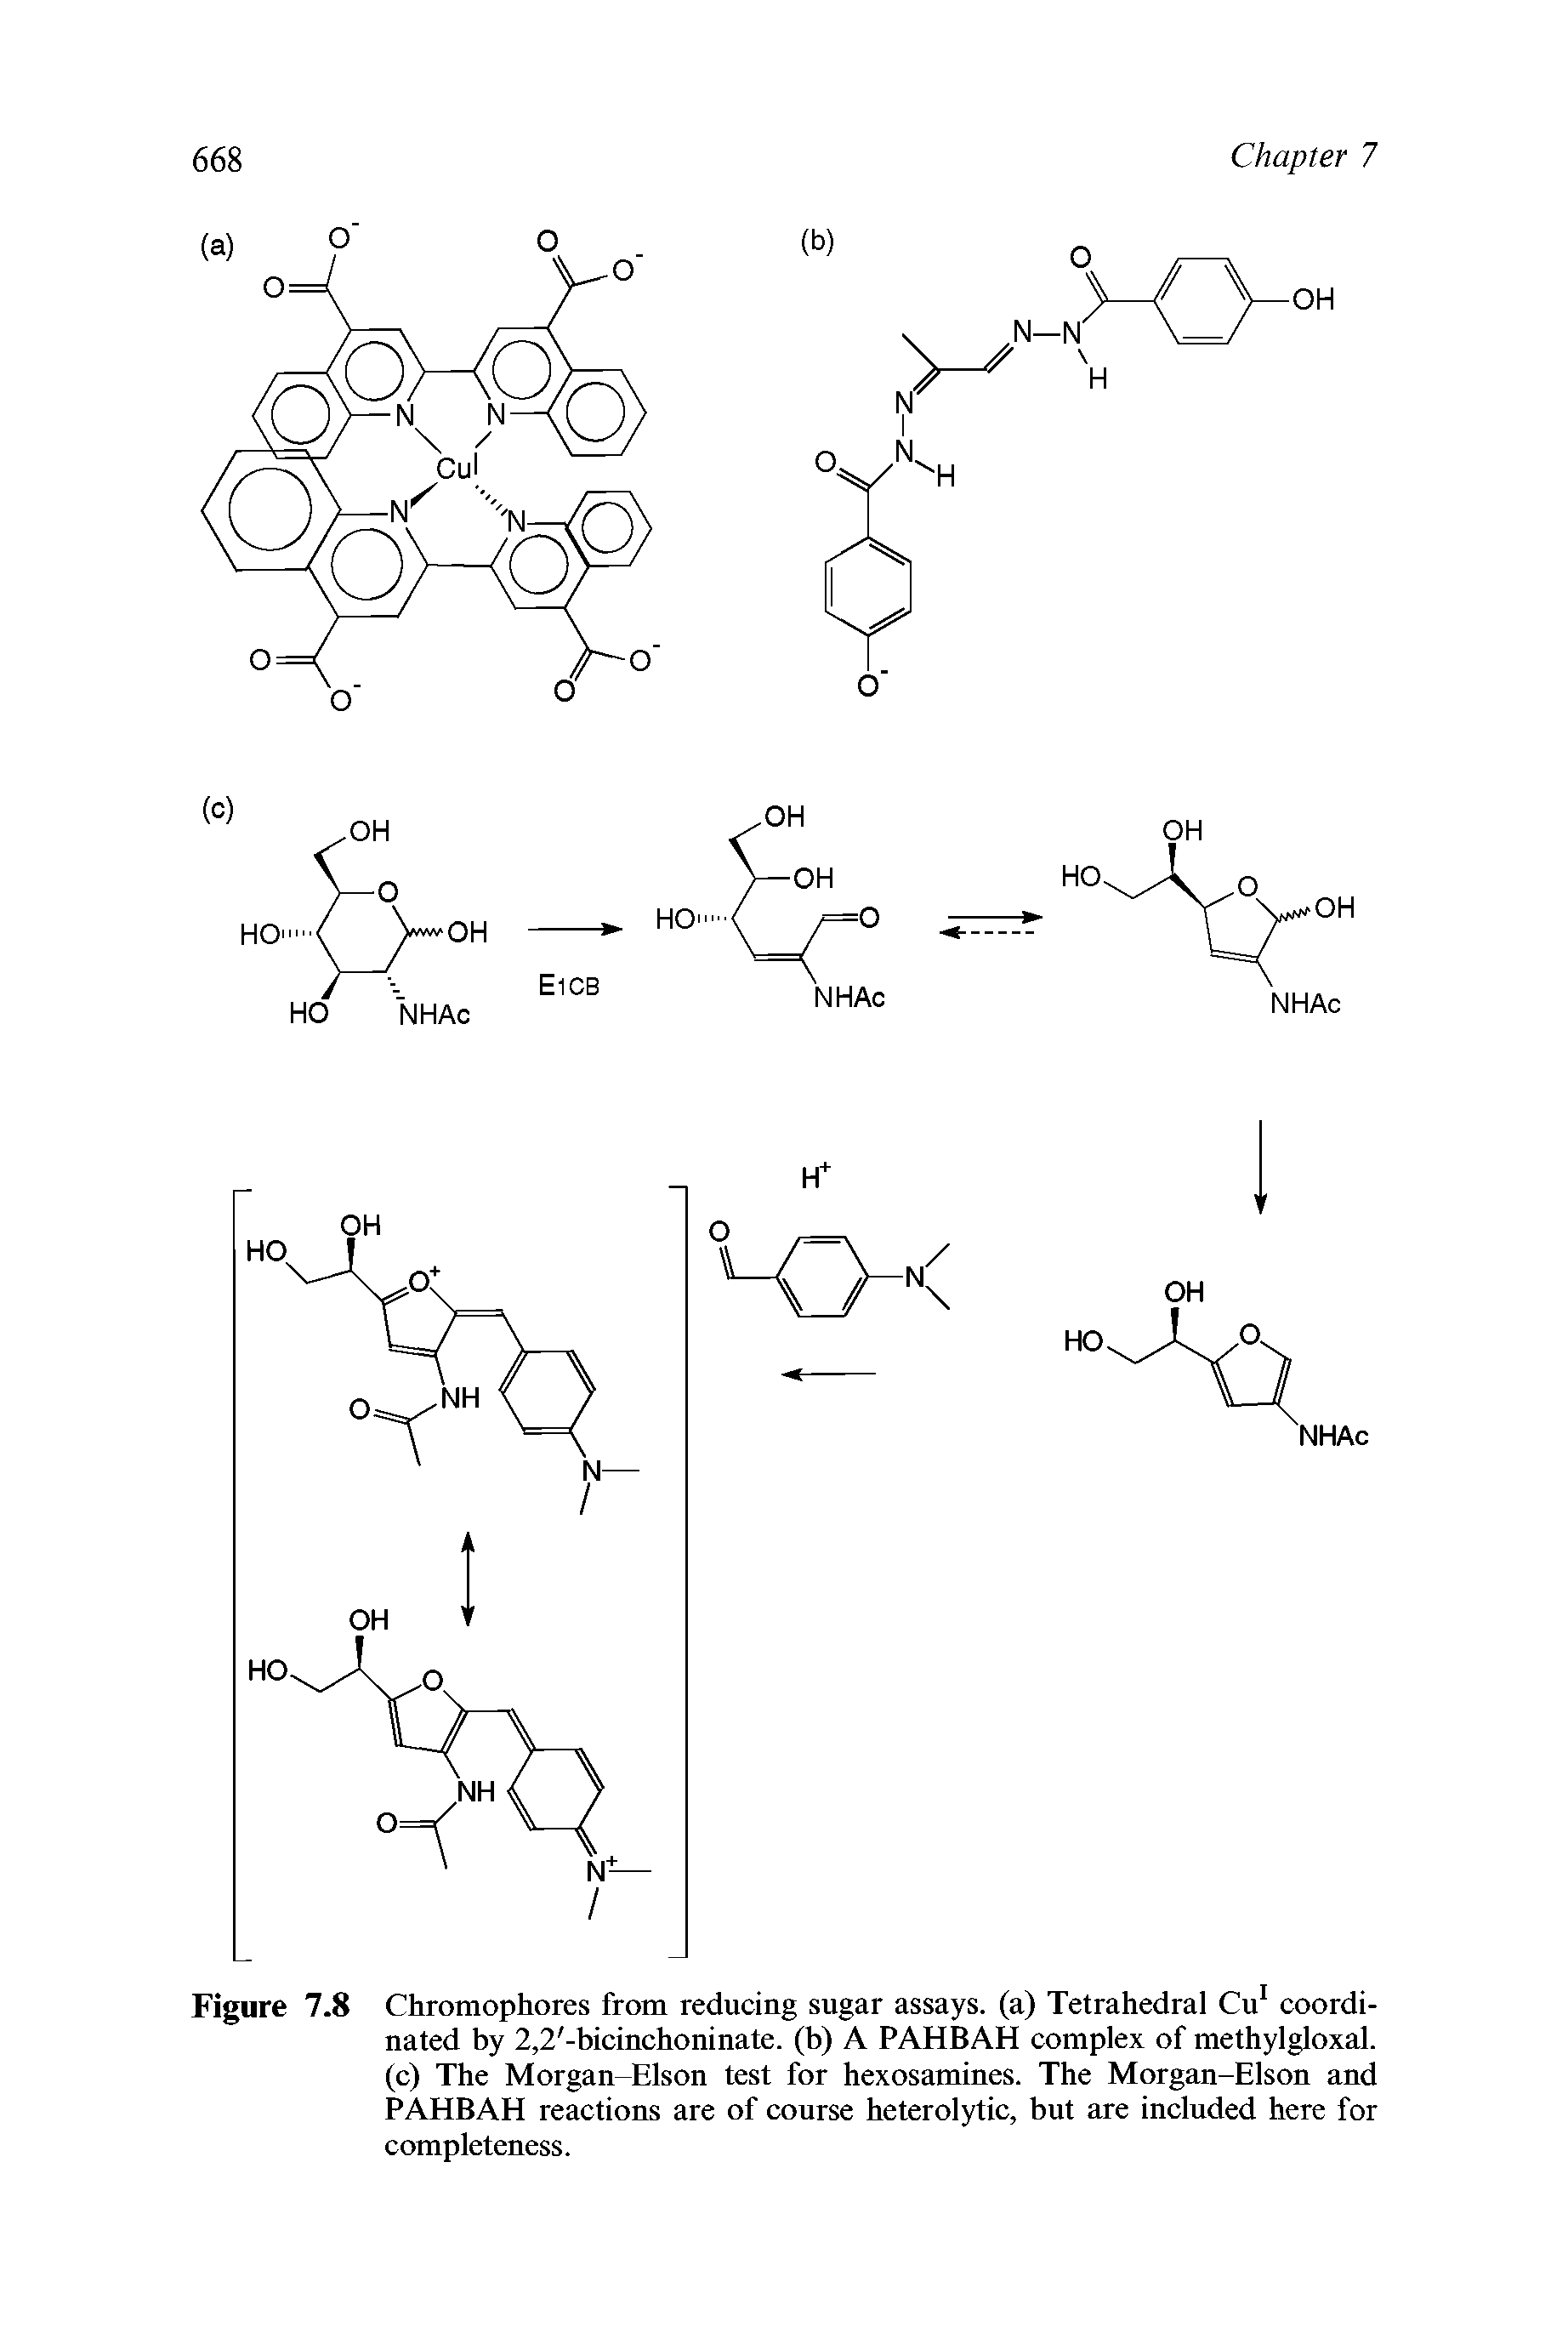 Figure 7.8 Chromophores from reducing sugar assays, (a) Tetrahedral Cu coordinated by 2,2 -bicinchoninate. (b) A PAHBAH complex of methylgloxal. (c) The Morgan-Elson test for hexosamines. The Morgan-Elson and PAHBAH reactions are of course heterolytic, but are included here for completeness.